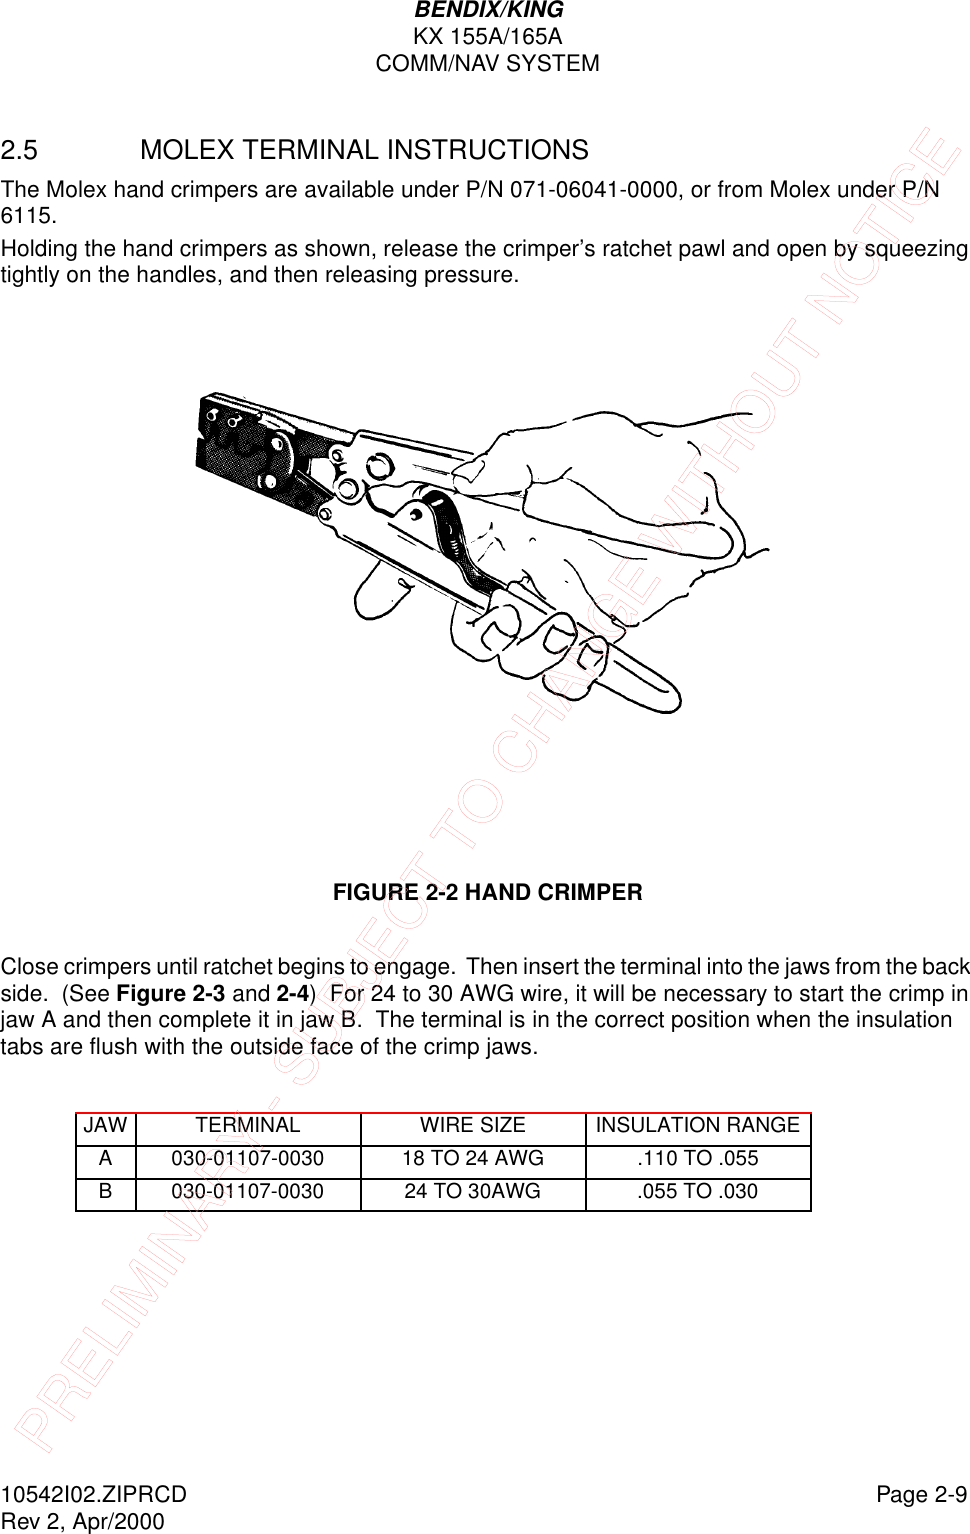 BENDIX/KINGKX 155A/165ACOMM/NAV SYSTEM10542I02.ZIPRCD Page 2-9Rev 2, Apr/20002.5 MOLEX TERMINAL INSTRUCTIONSThe Molex hand crimpers are available under P/N 071-06041-0000, or from Molex under P/N 6115.Holding the hand crimpers as shown, release the crimper’s ratchet pawl and open by squeezing tightly on the handles, and then releasing pressure.FIGURE 2-2 HAND CRIMPERClose crimpers until ratchet begins to engage.  Then insert the terminal into the jaws from the back side.  (See Figure 2-3 and 2-4)  For 24 to 30 AWG wire, it will be necessary to start the crimp in jaw A and then complete it in jaw B.  The terminal is in the correct position when the insulation tabs are flush with the outside face of the crimp jaws.JAW TERMINAL WIRE SIZE INSULATION RANGEA 030-01107-0030 18 TO 24 AWG .110 TO .055B 030-01107-0030 24 TO 30AWG .055 TO .030PRELIMINARY - SUBJECT TO CHANGE WITHOUT NOTICE